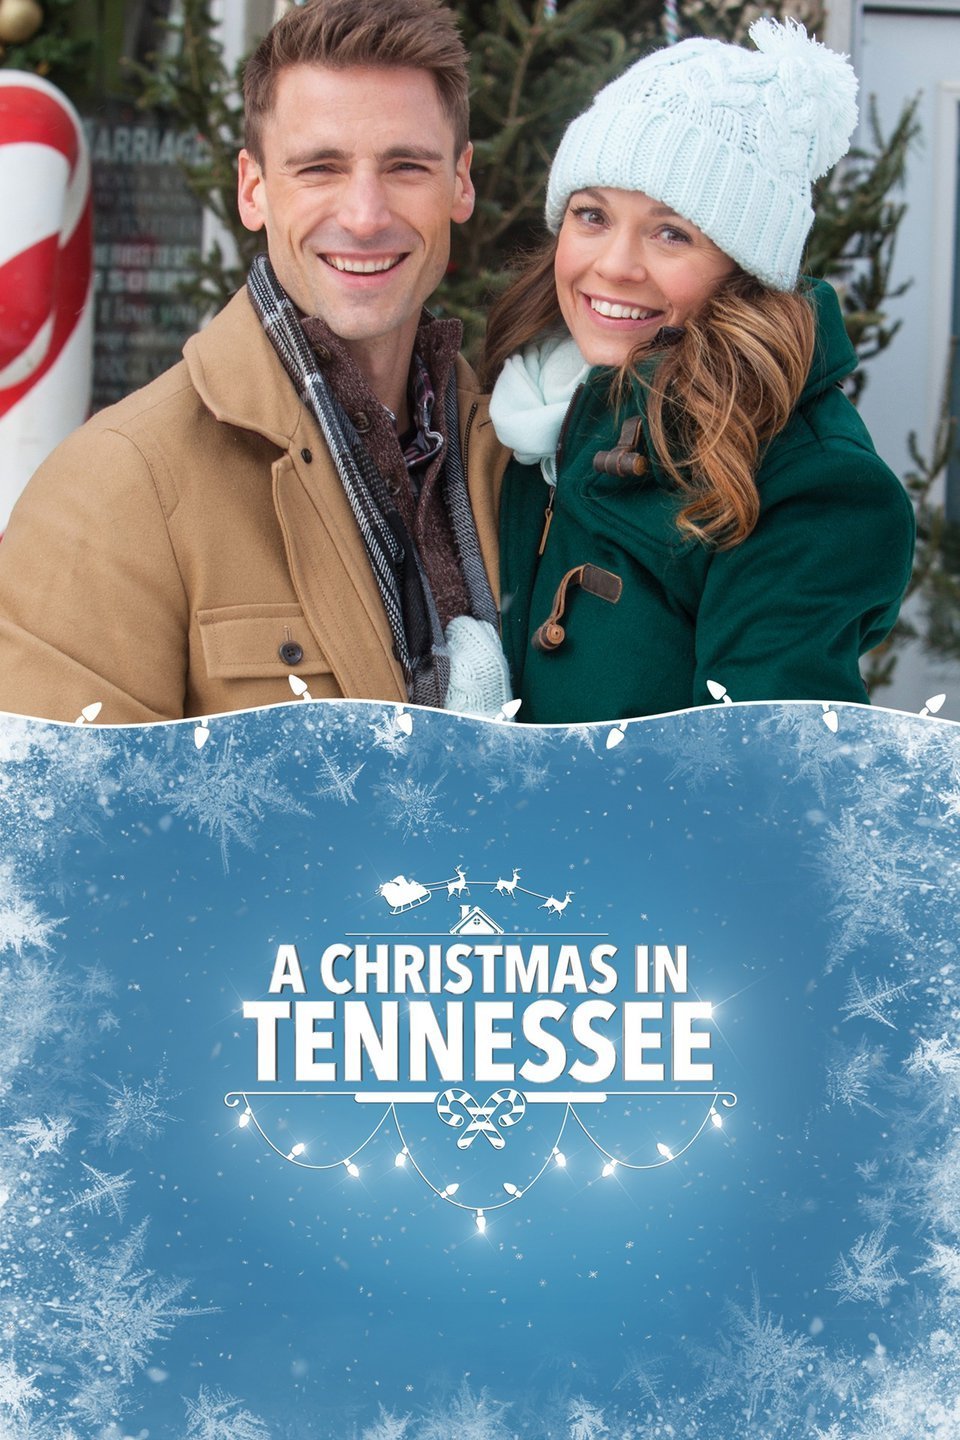 Poster of the movie A Christmas in Tennessee